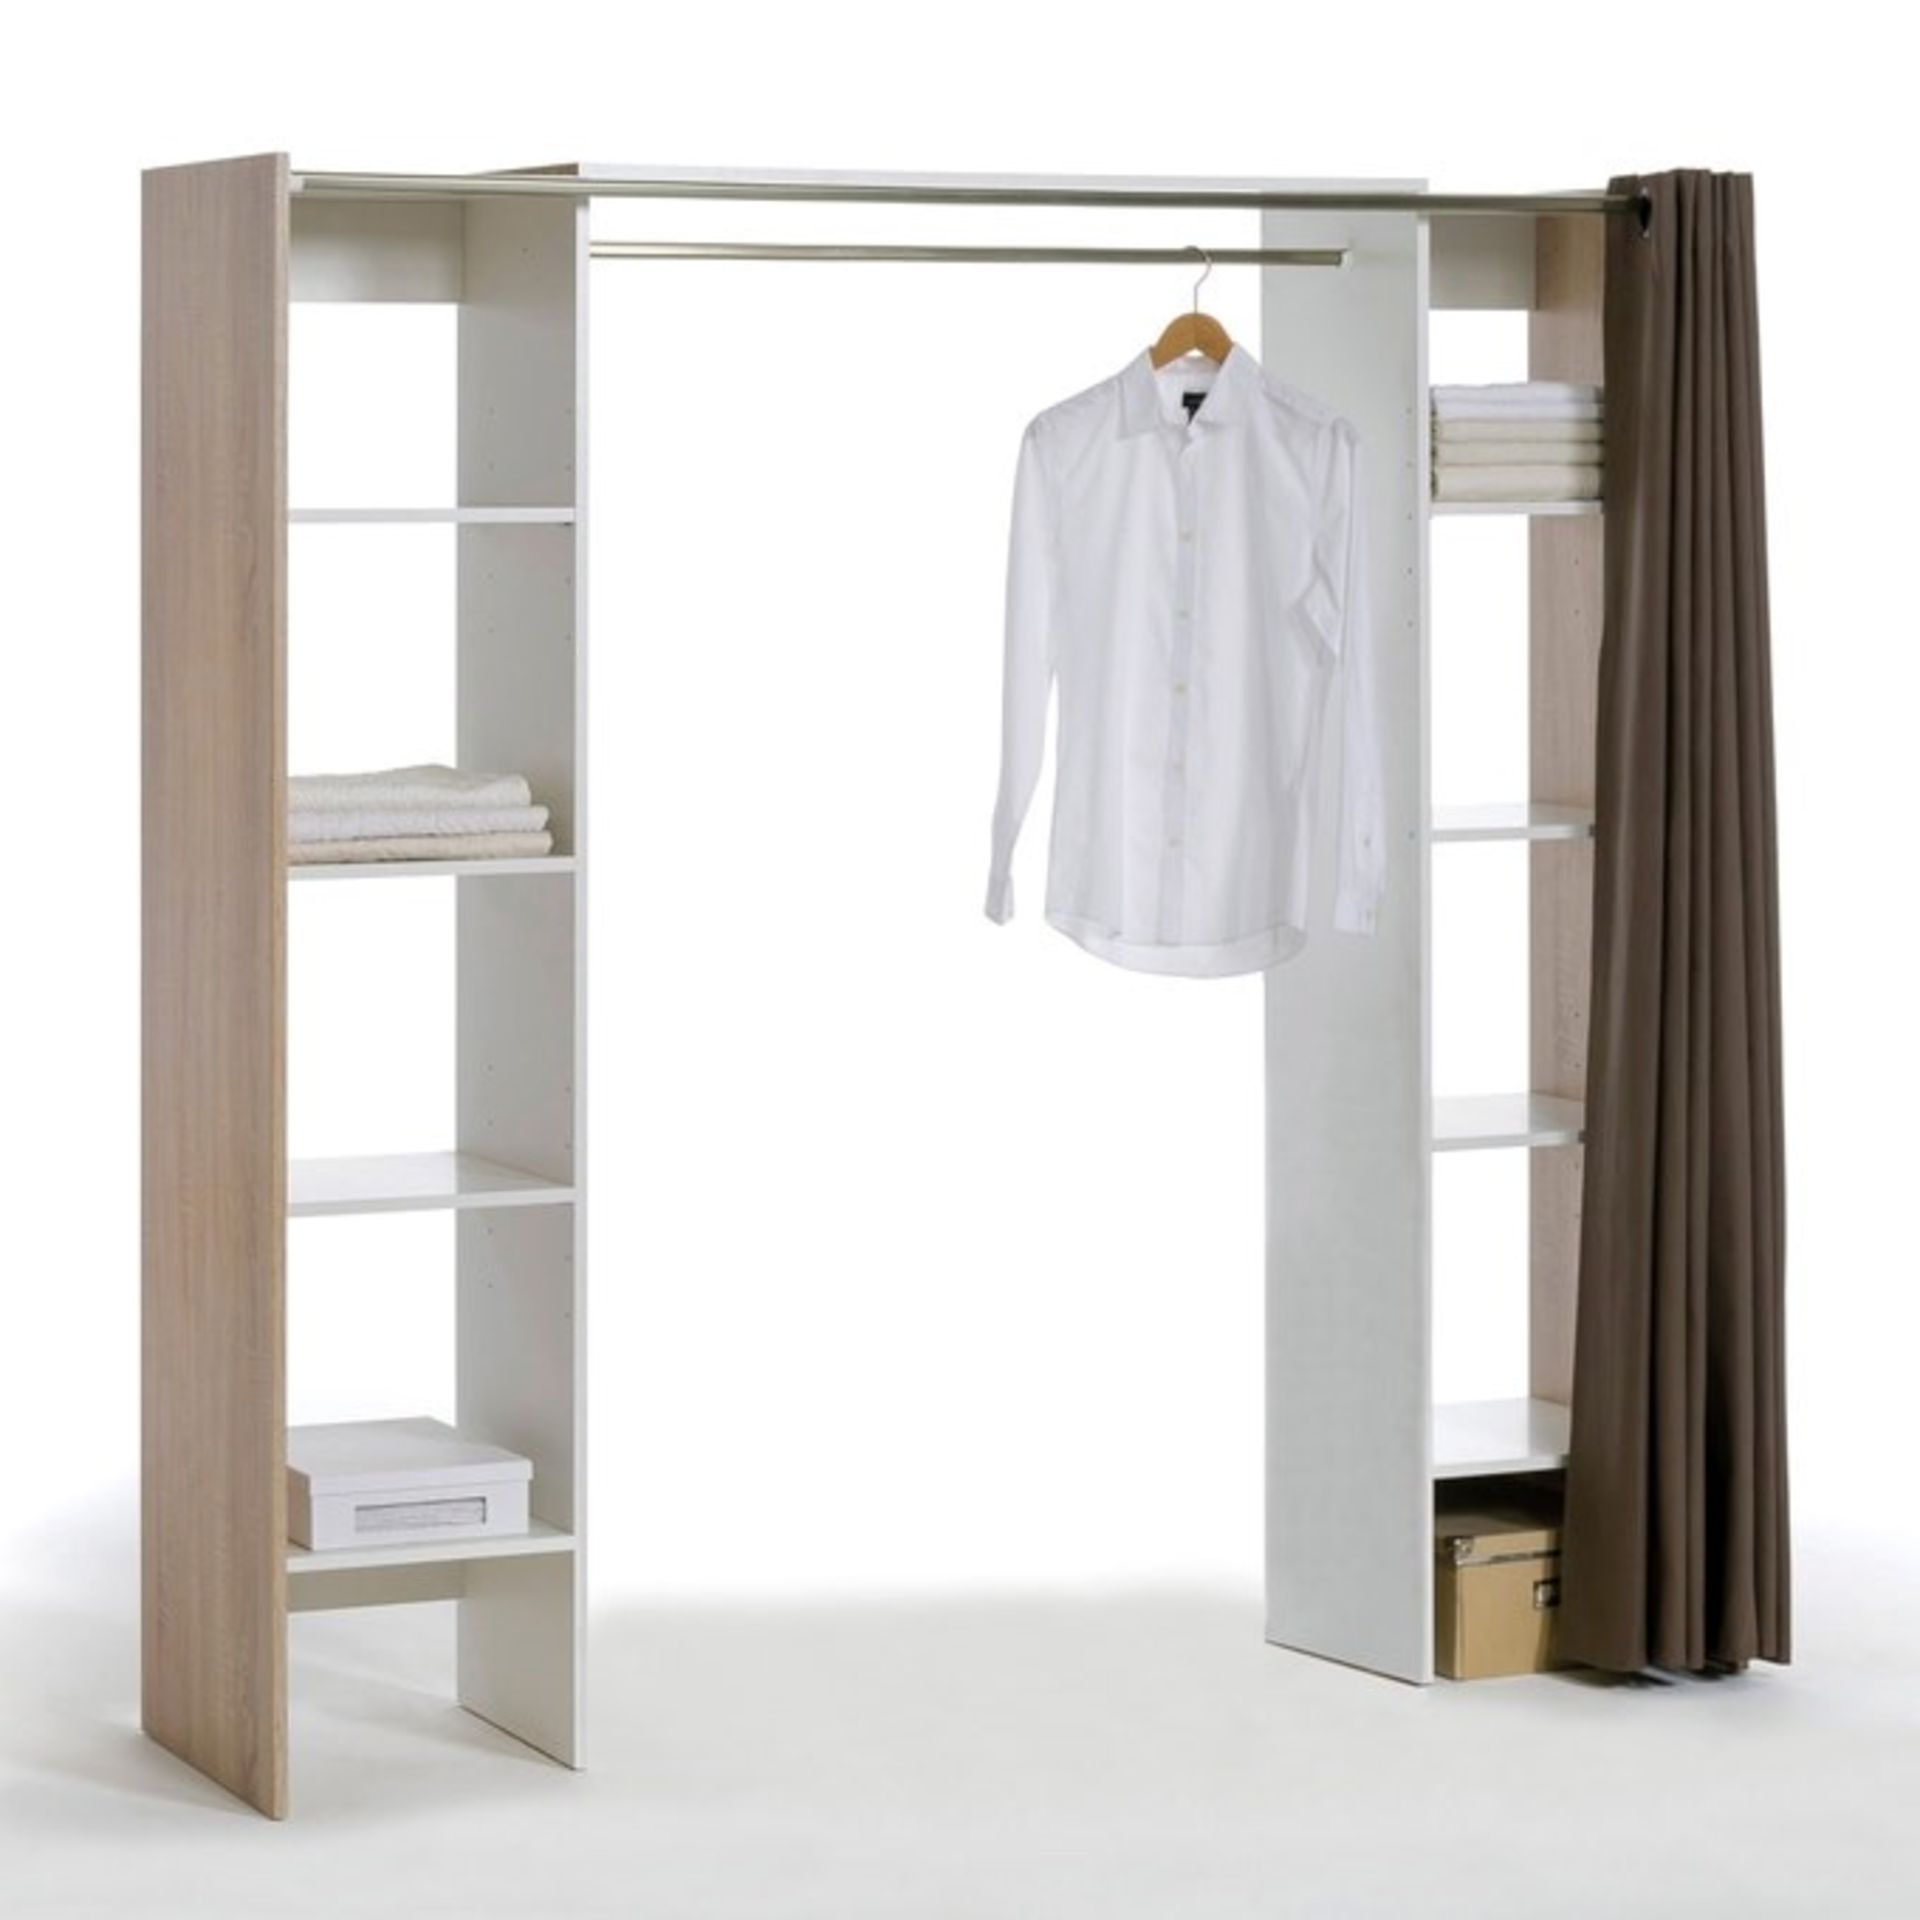 1 GRADE A BOXED DESIGNER REYNAL EXTENDABLE WARDROBE IN OAK / RRP £375.00 (PUBLIC VIEWING AVAILABLE)